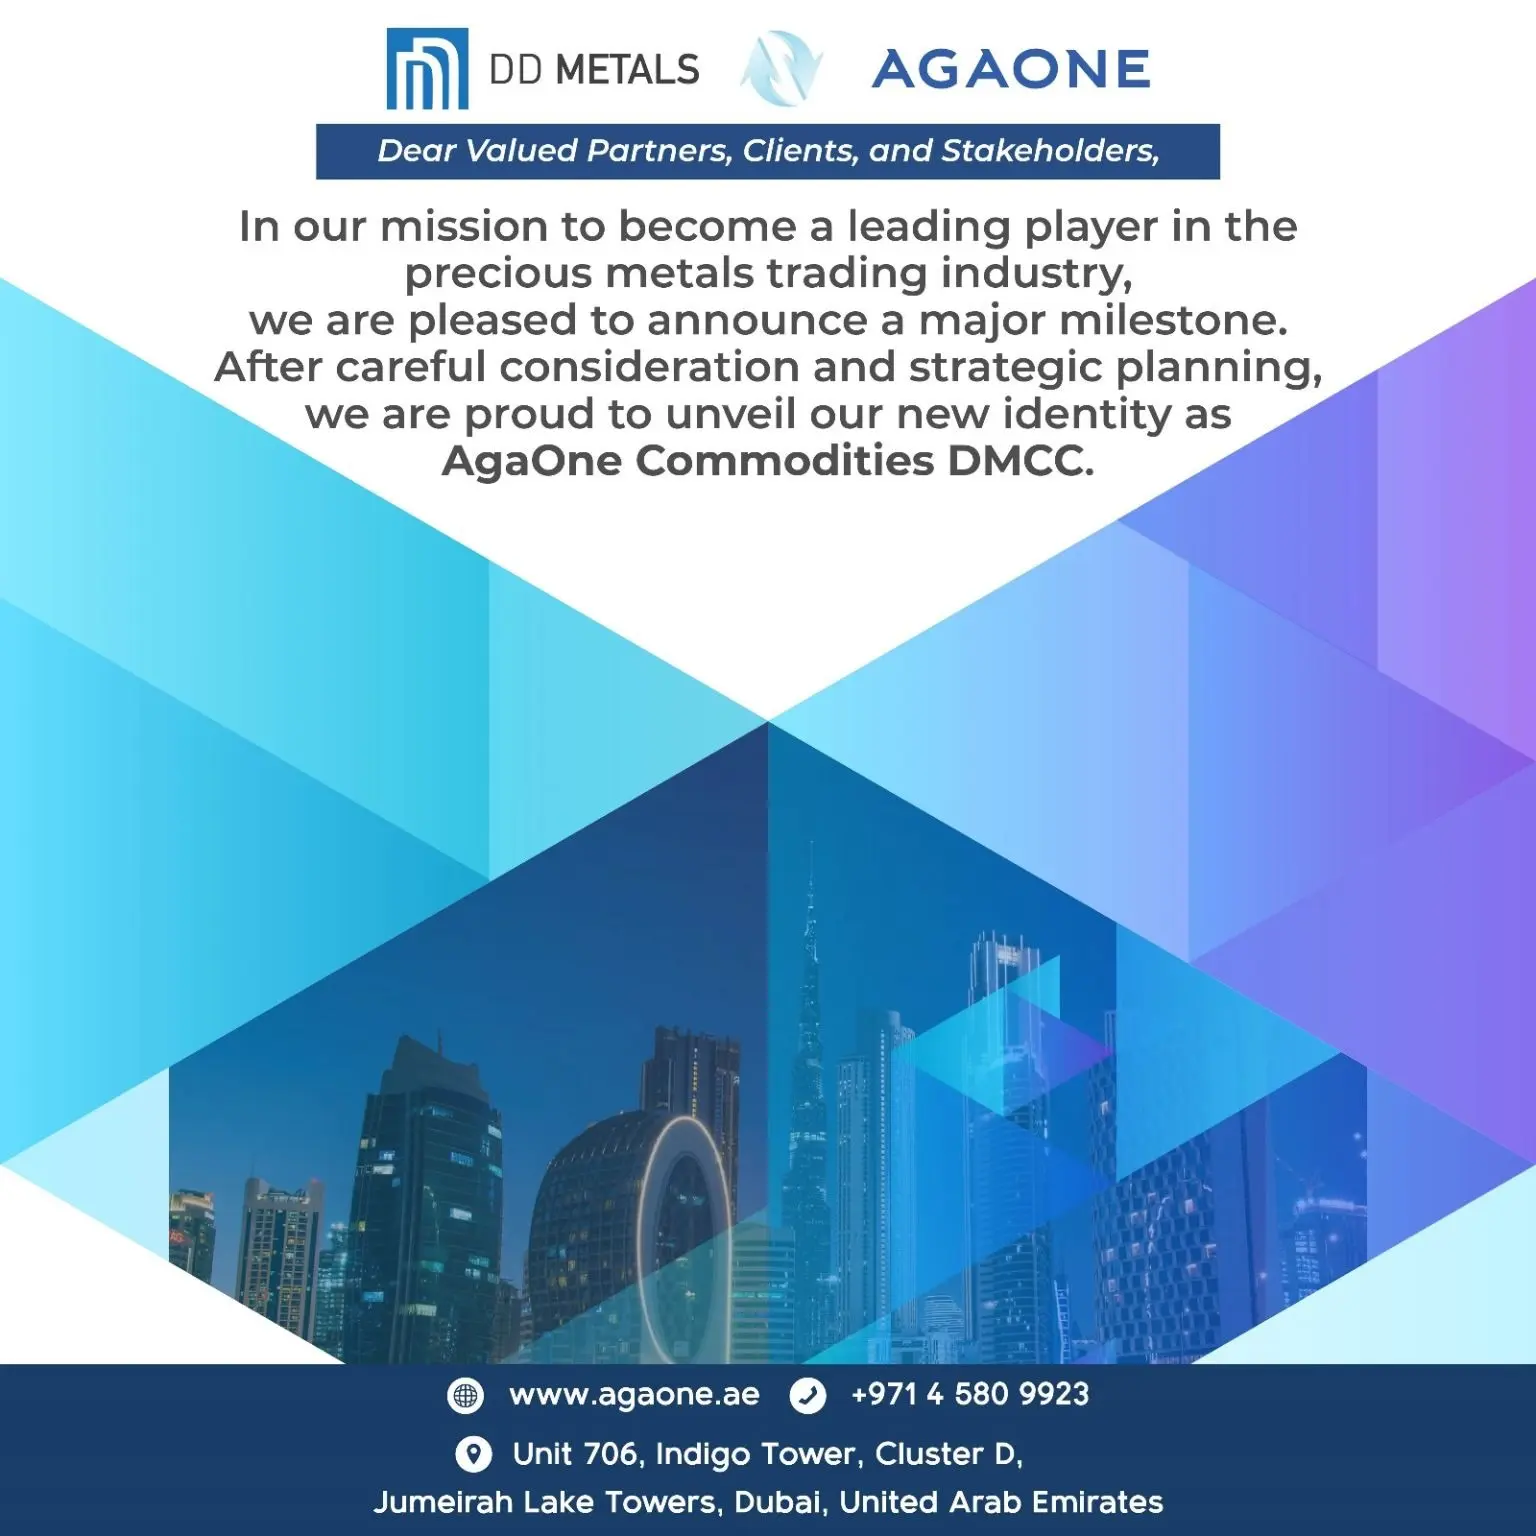 AgaOne Commodities DMCC Emerges as a Leader in Precious Metals 